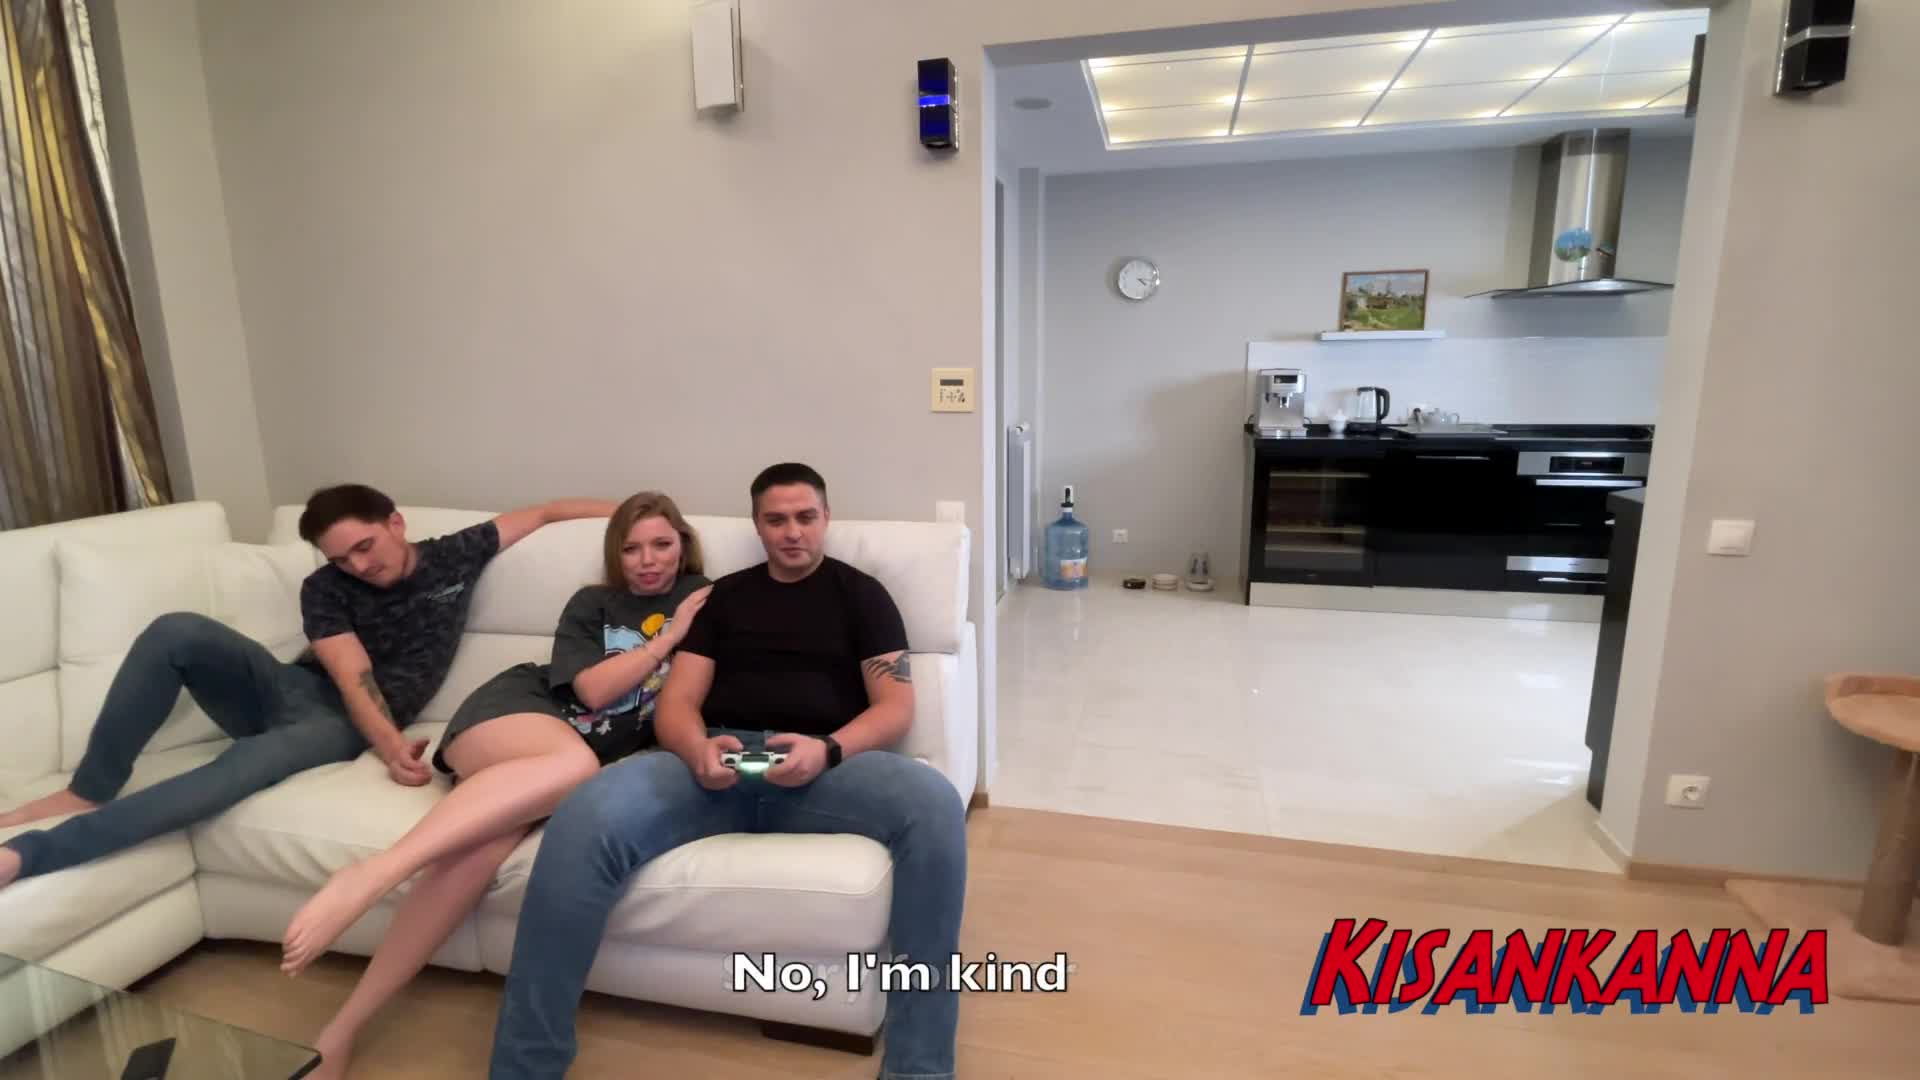 Russian Kisankanna is cheating on her boyfriend again as she is getting her amazing ass fucked hard in the kitchen while her boyfriend plays video games